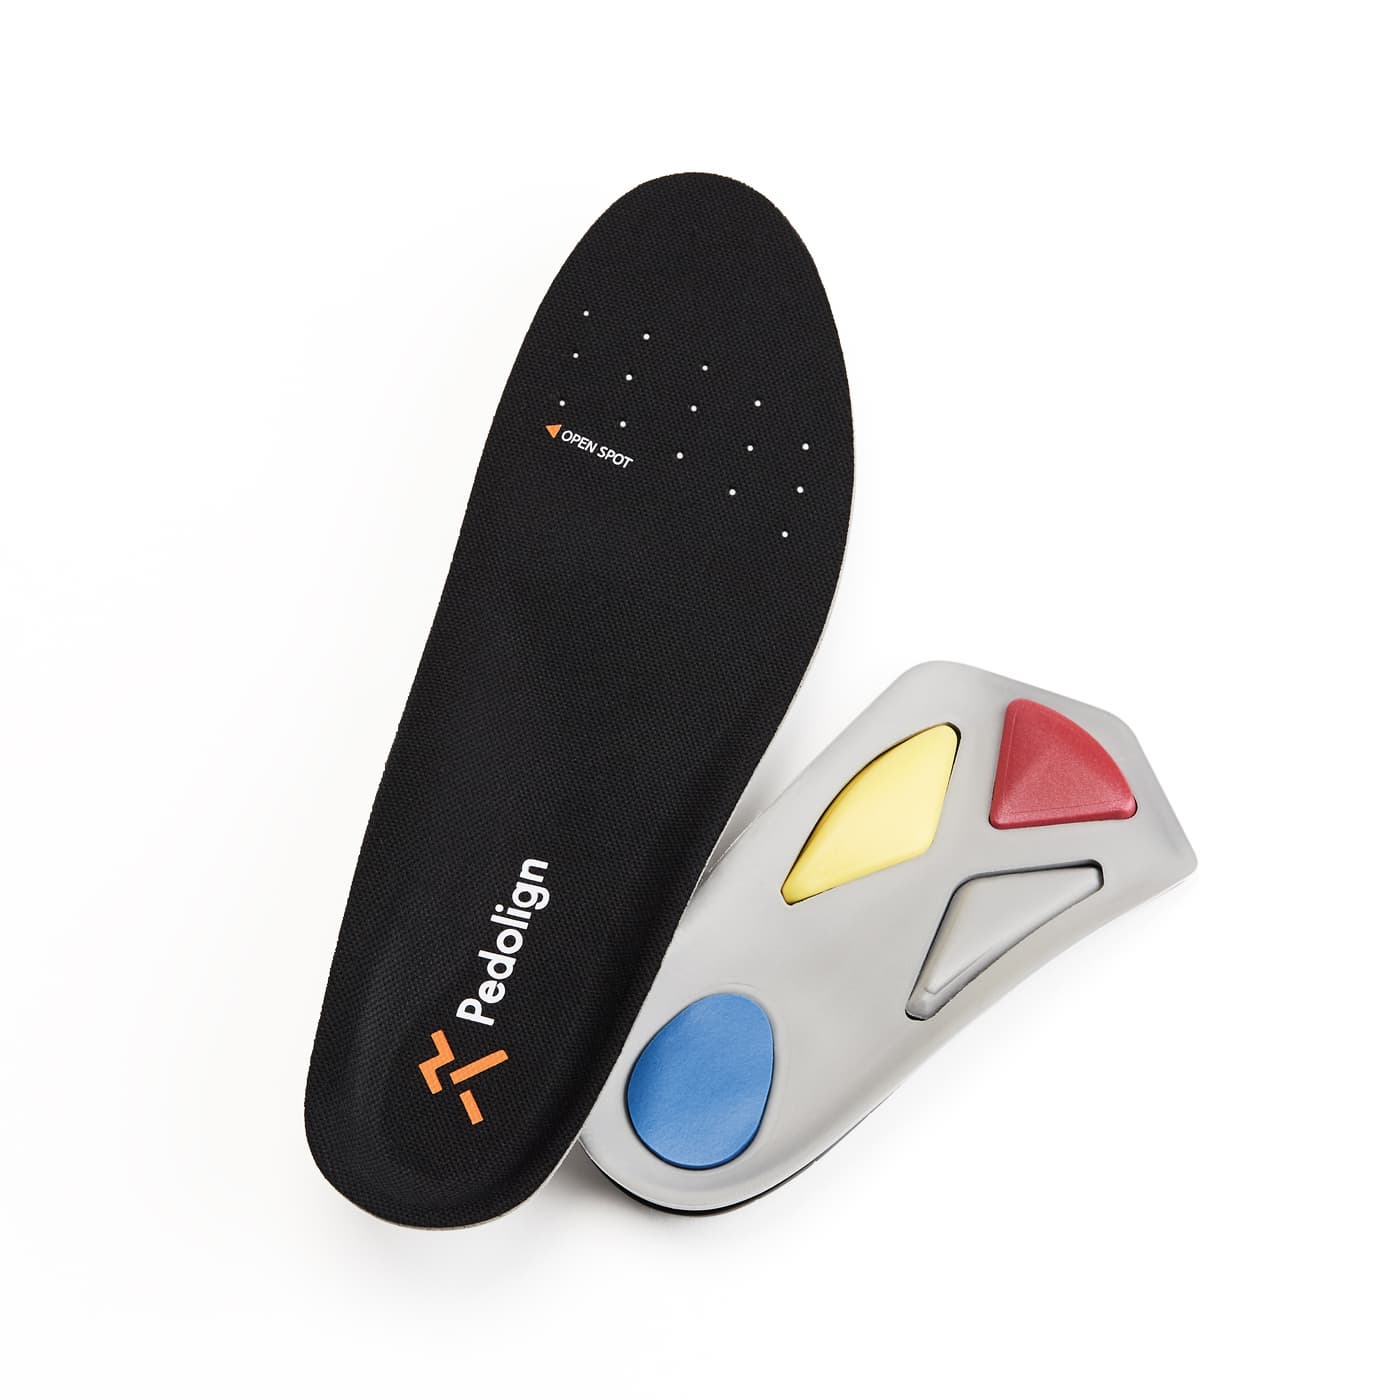 Pedolign DIY functional Customized Insole